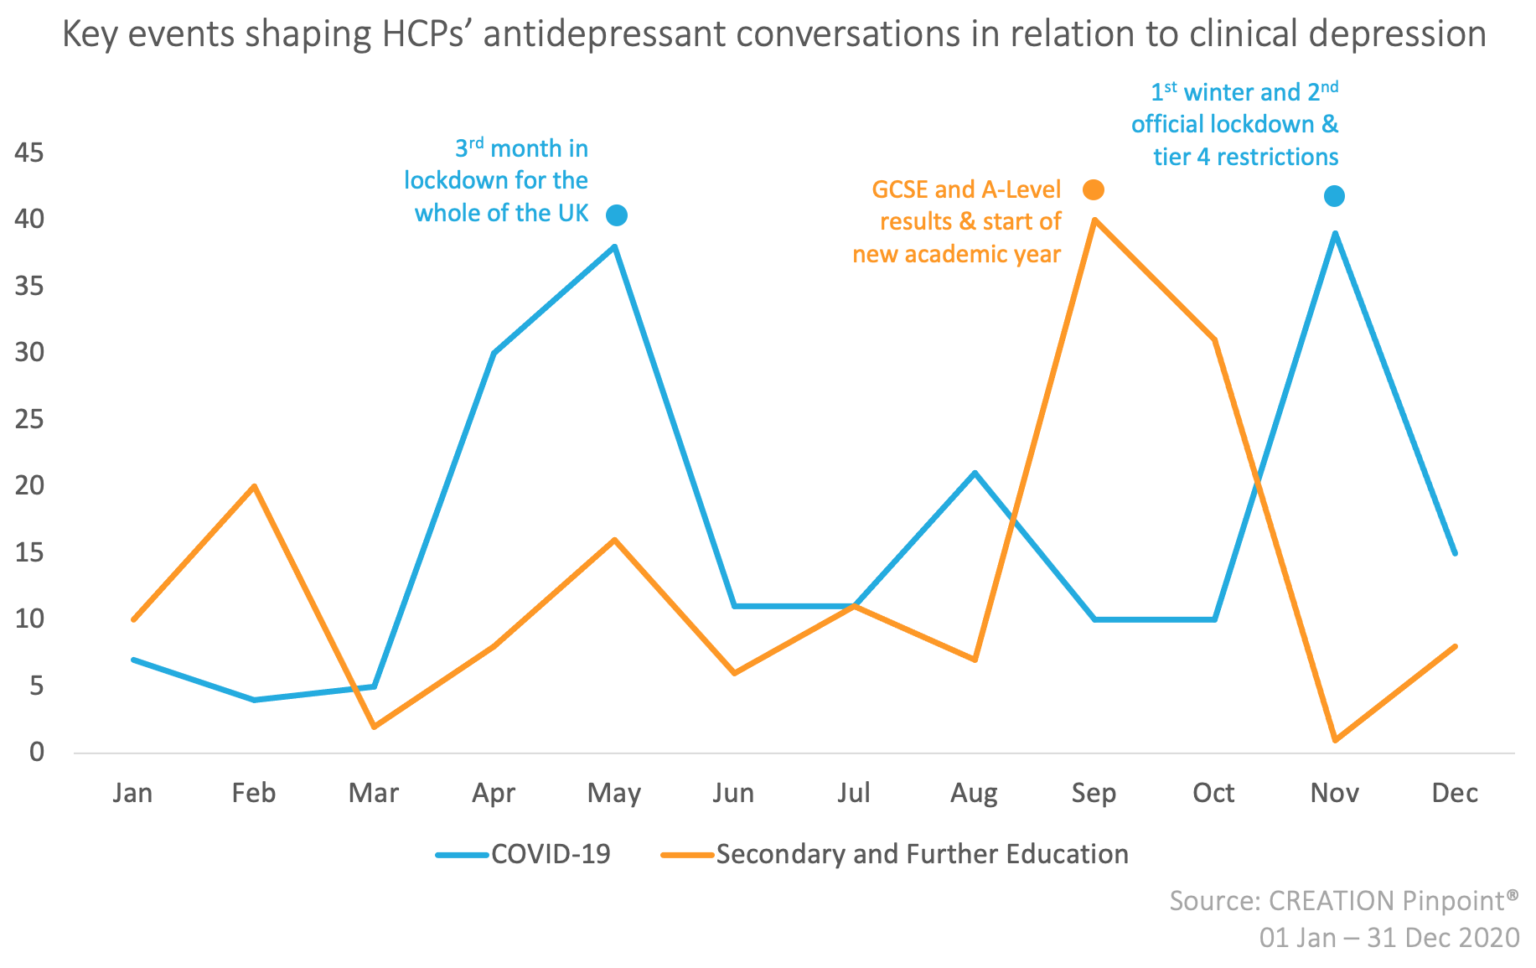 Key events shaping HCPs antidepressant conversations in relation to clinical depression 1536x968